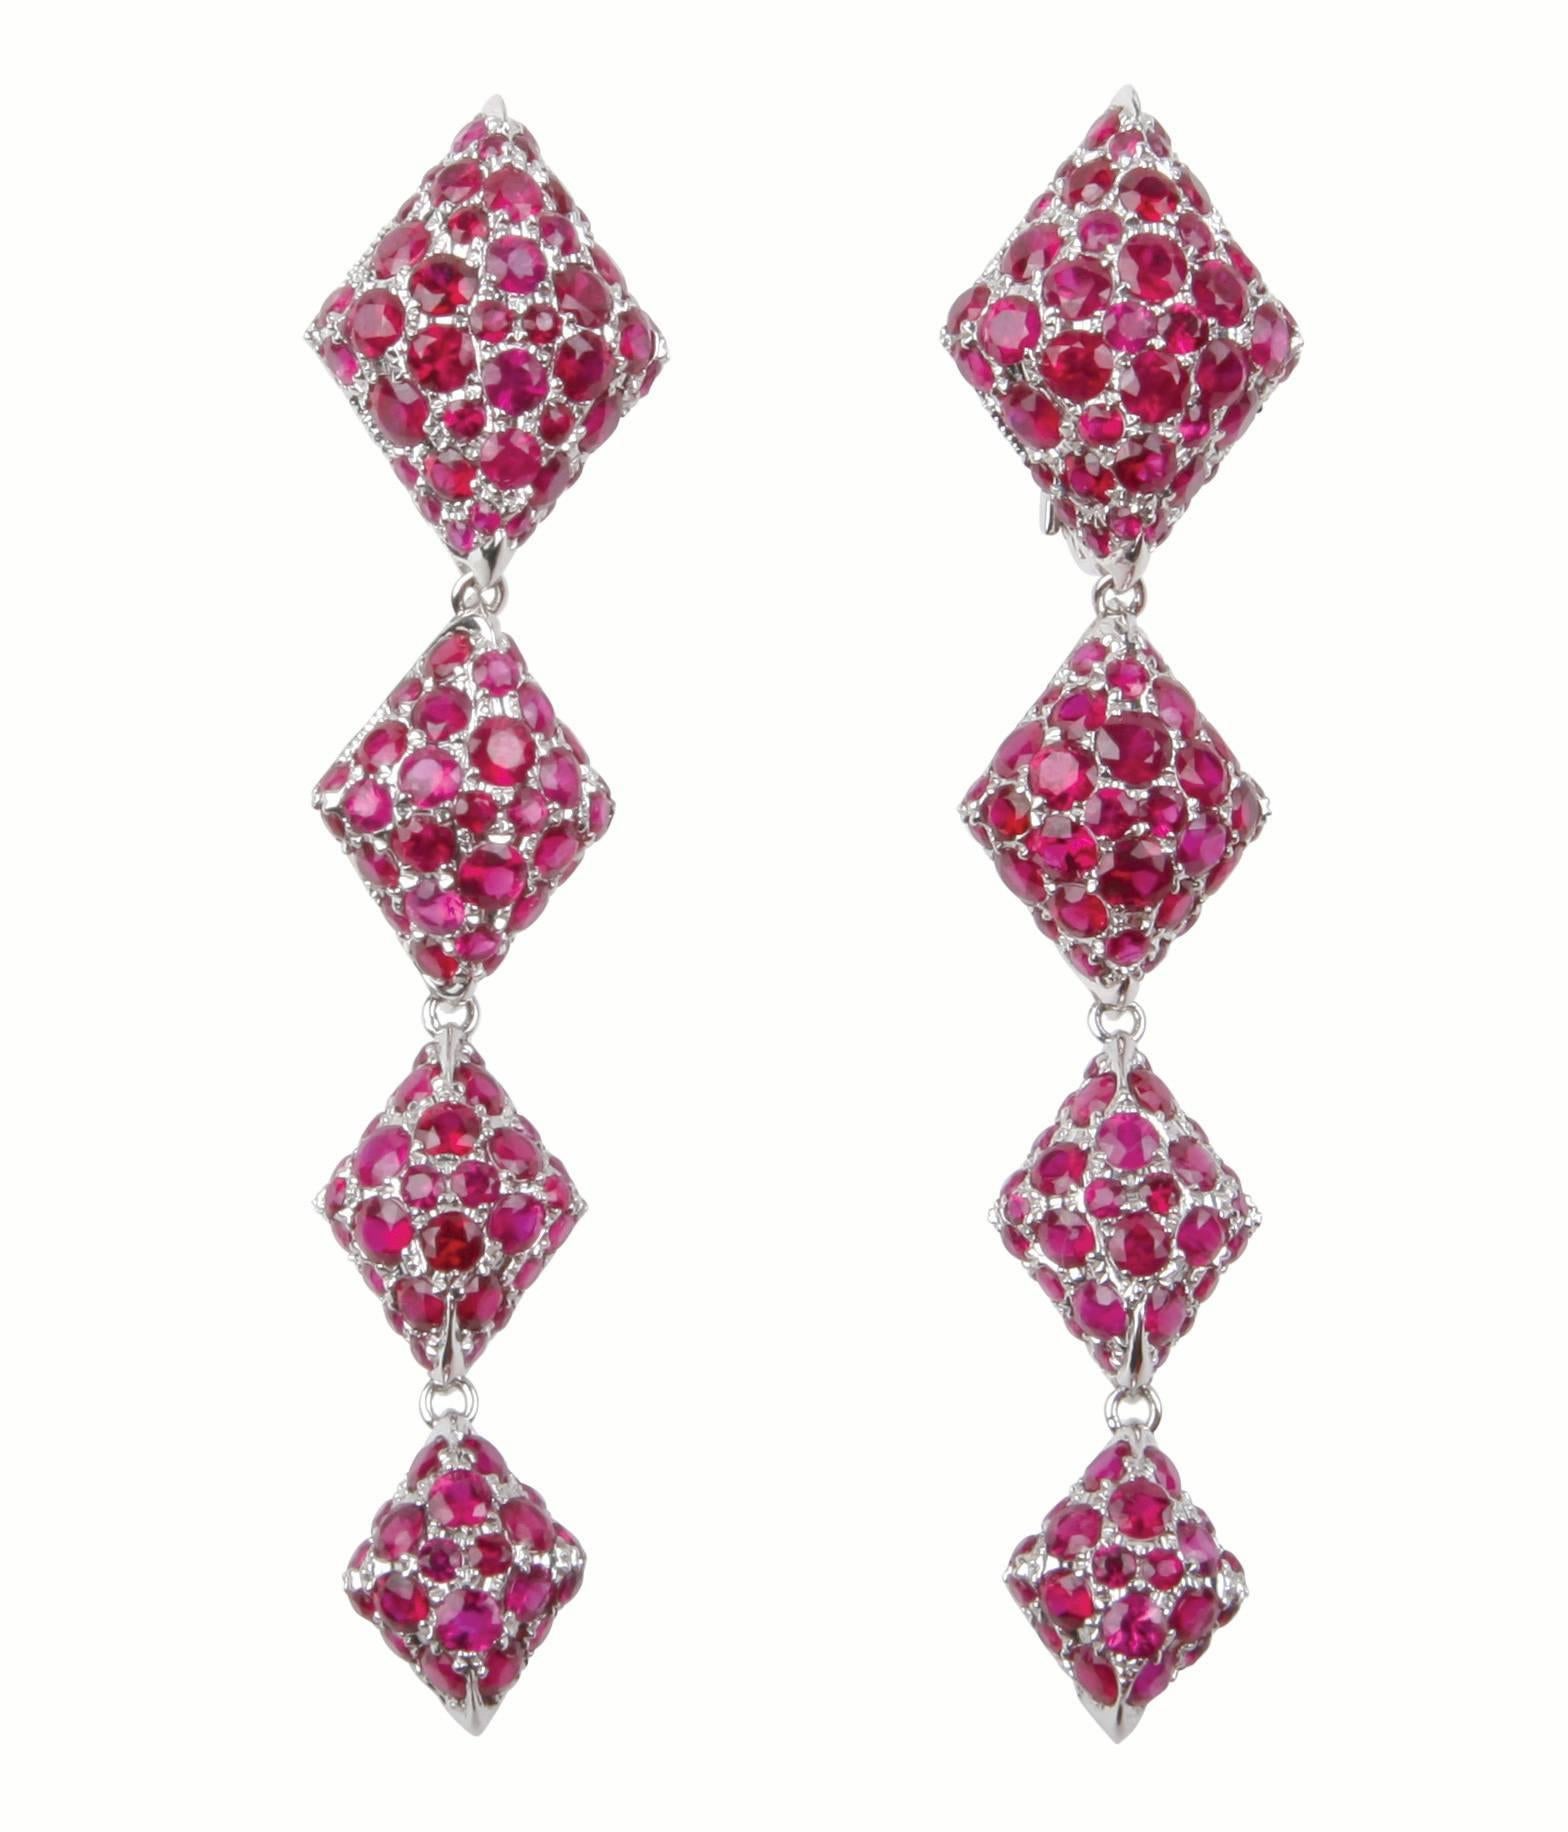 Metal: 18K White Gold 
Precious Stones: Rubies (approximately 10cts)
Please allow for slight variations in measurements as pieces are handmade.

Youmna's 18K White Gold and Rubies Harlequin Stud Earrings are set with nearly 10 carats of rubies,